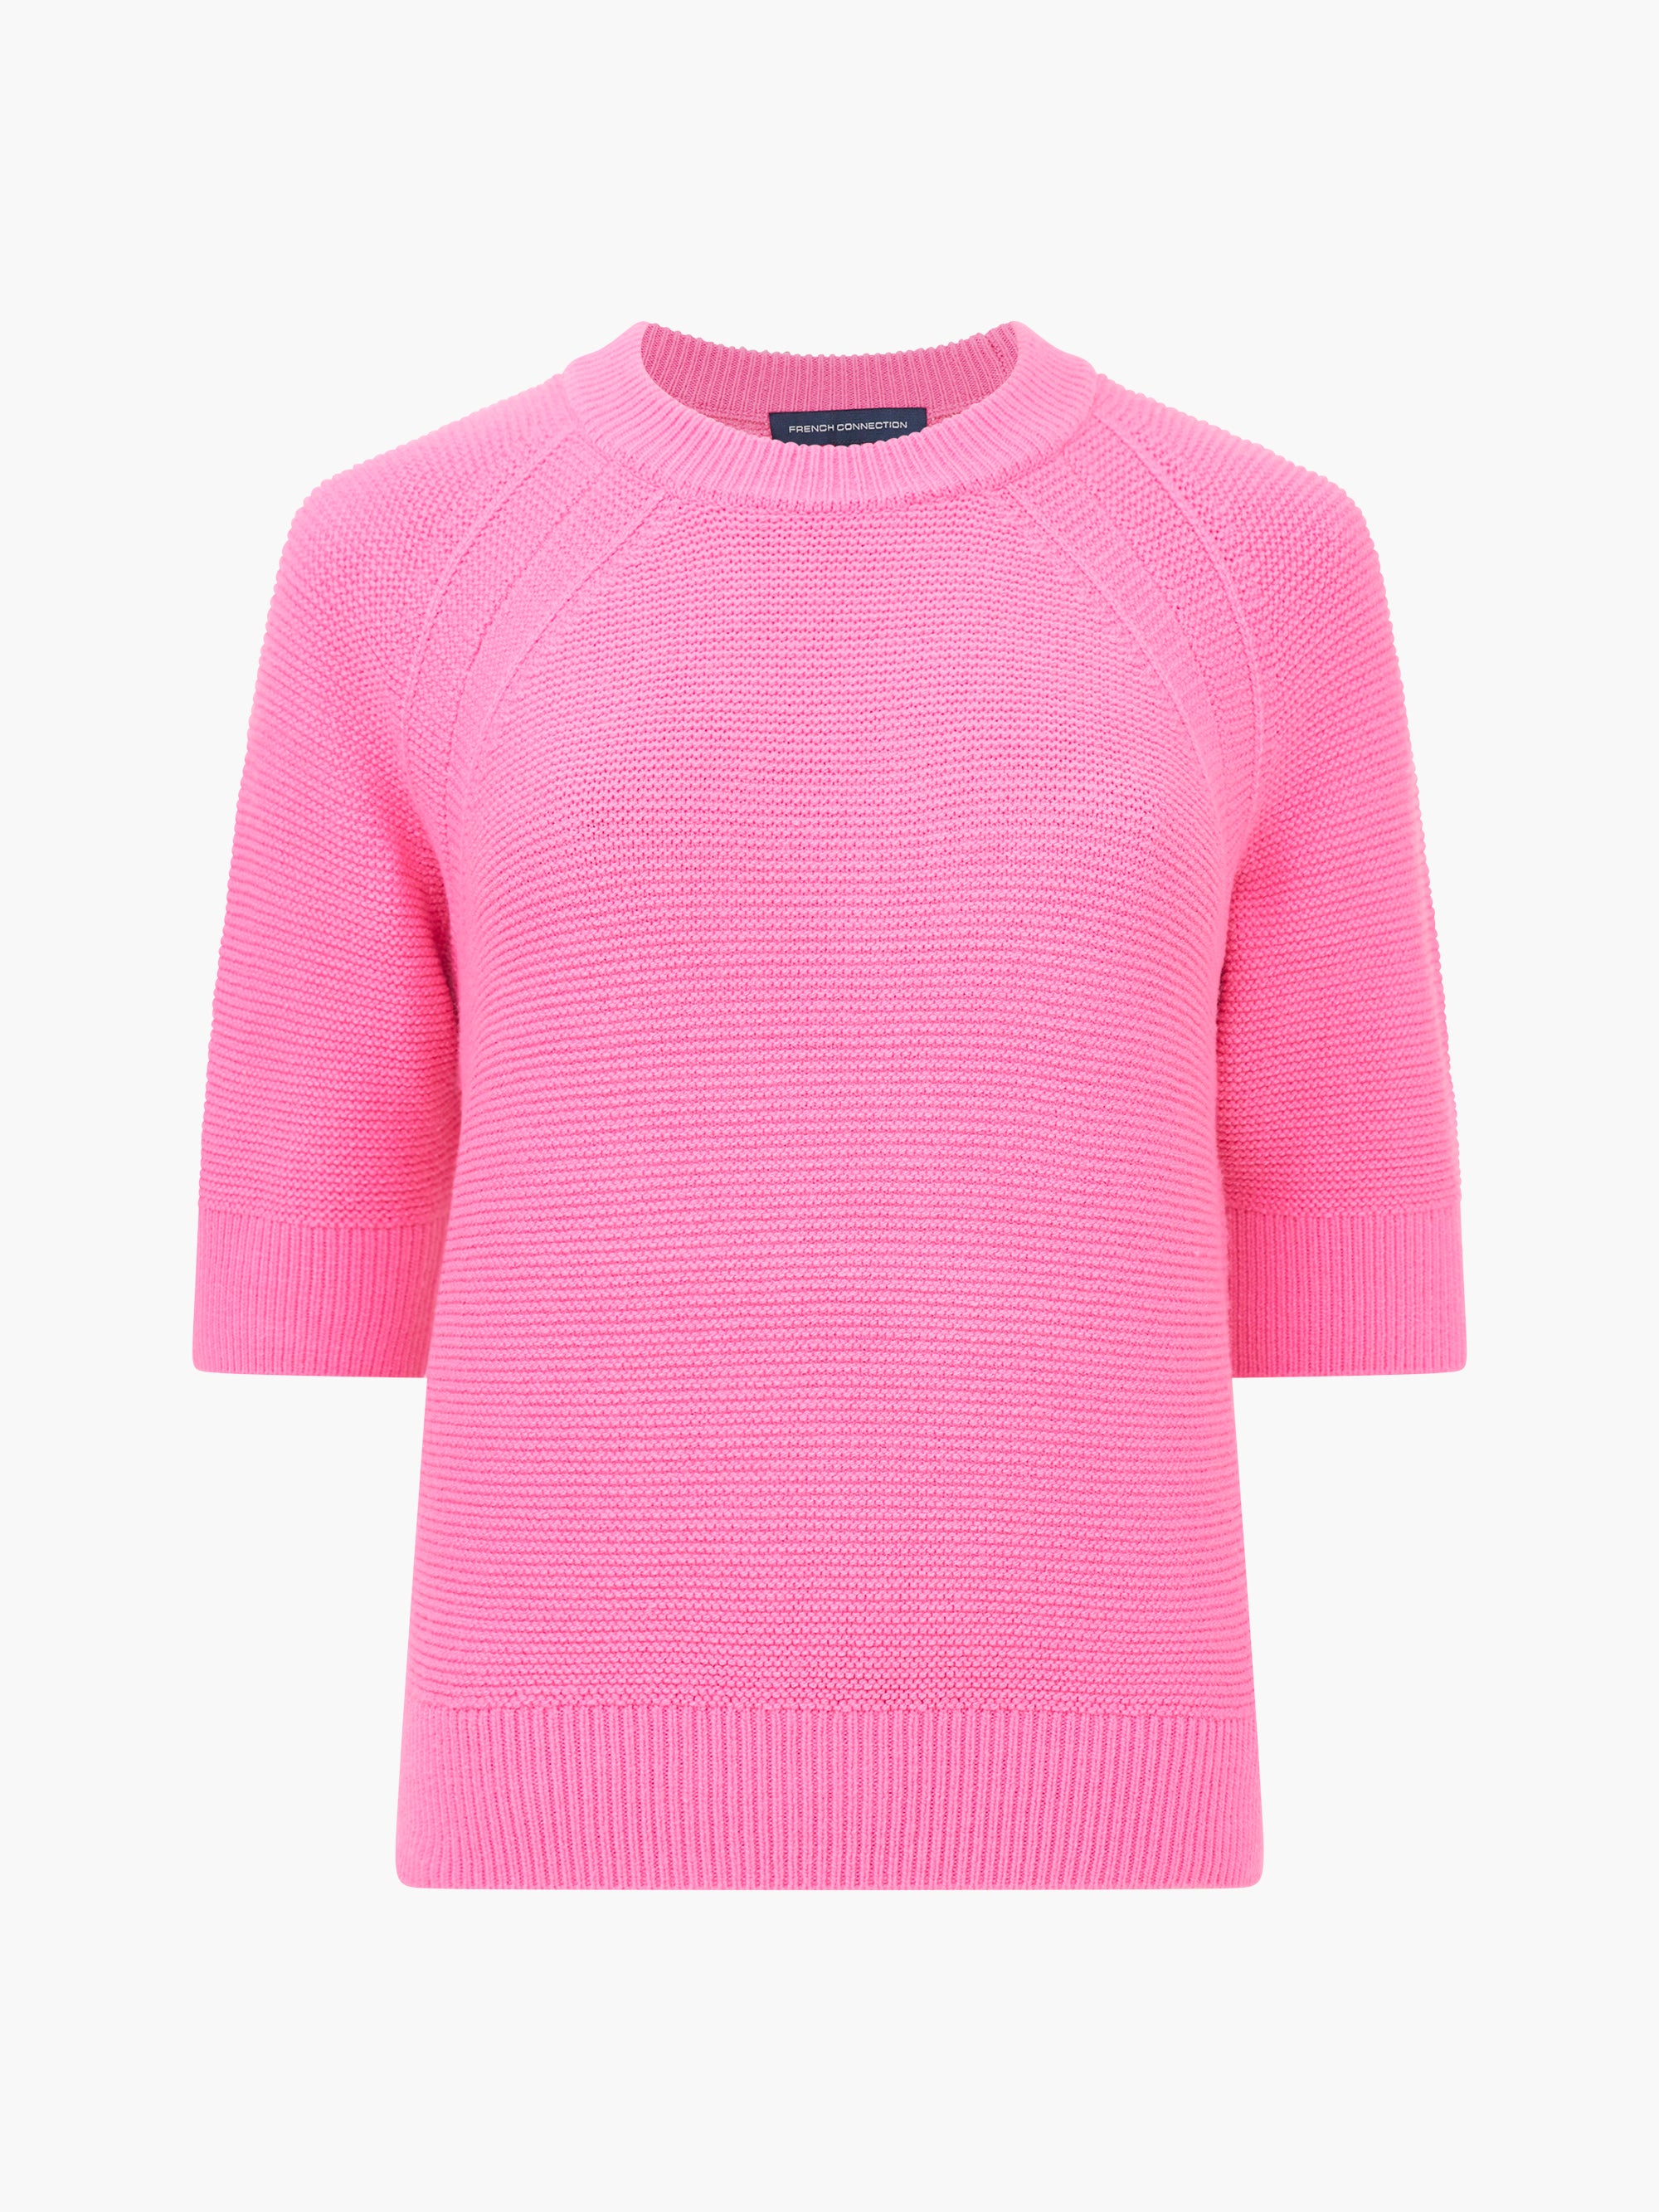 Babysoft Short Sleeve Jumper Bright Prosecco Pink | French Connection UK